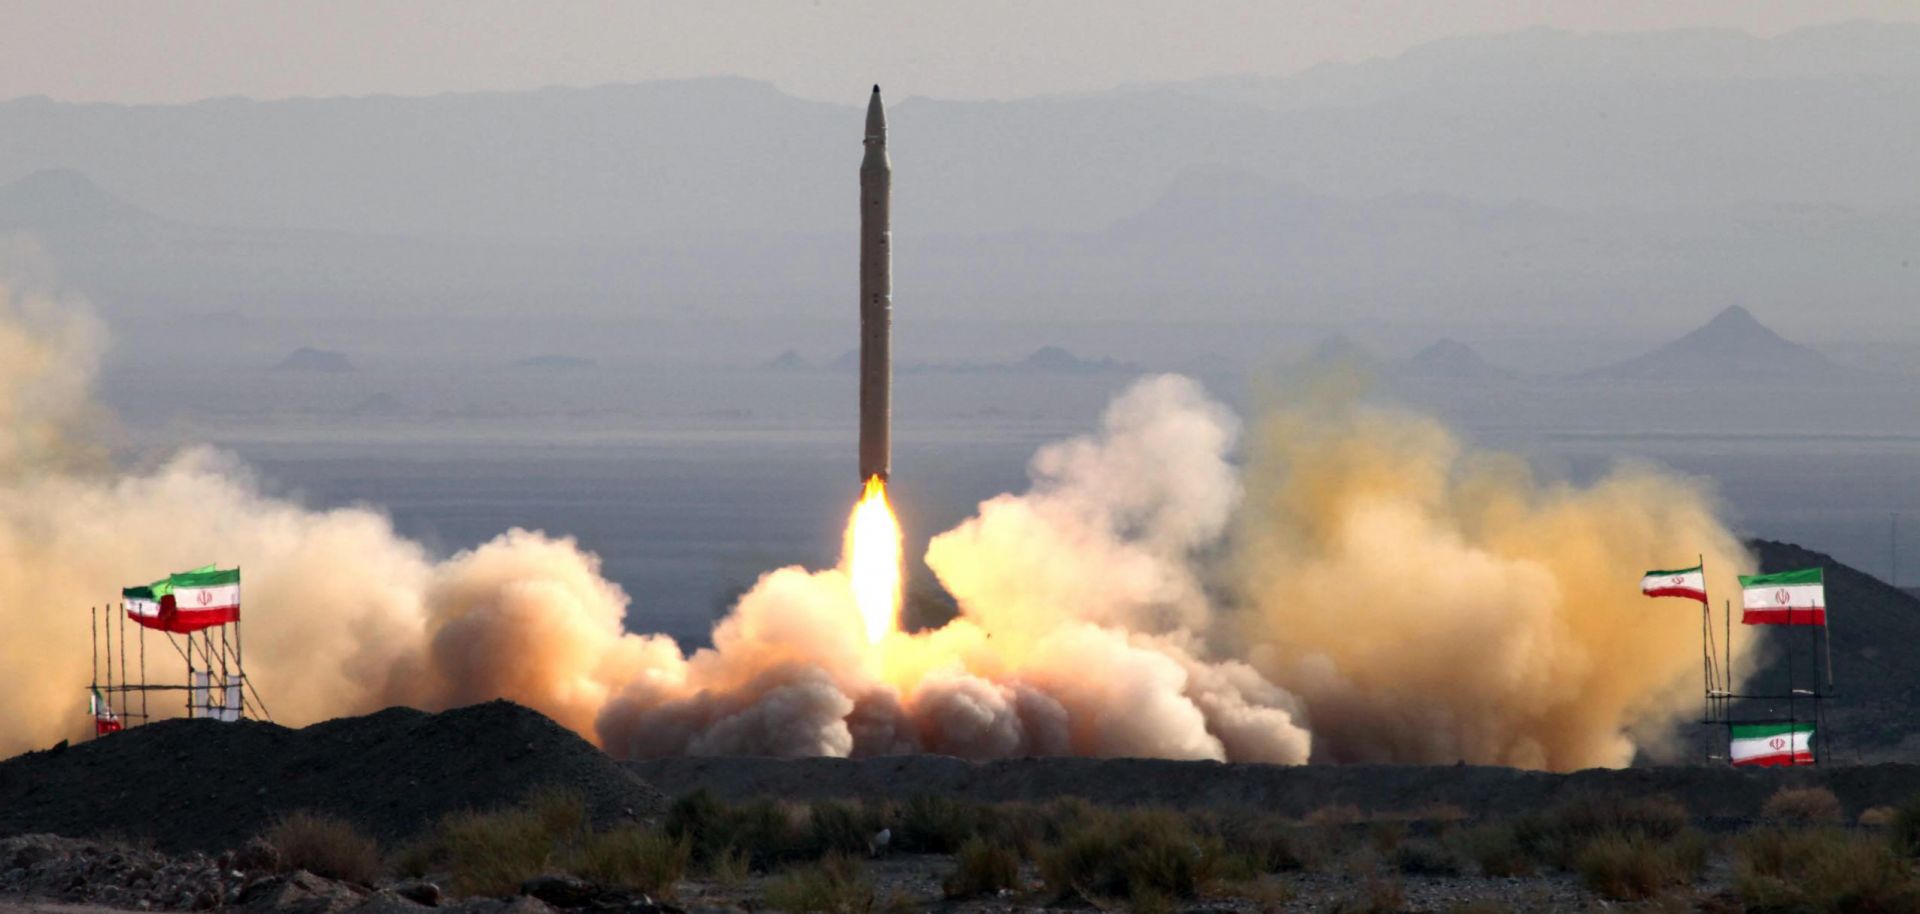 This photo shows Iran's successful test launch of its Qiam-1 ballistic missile